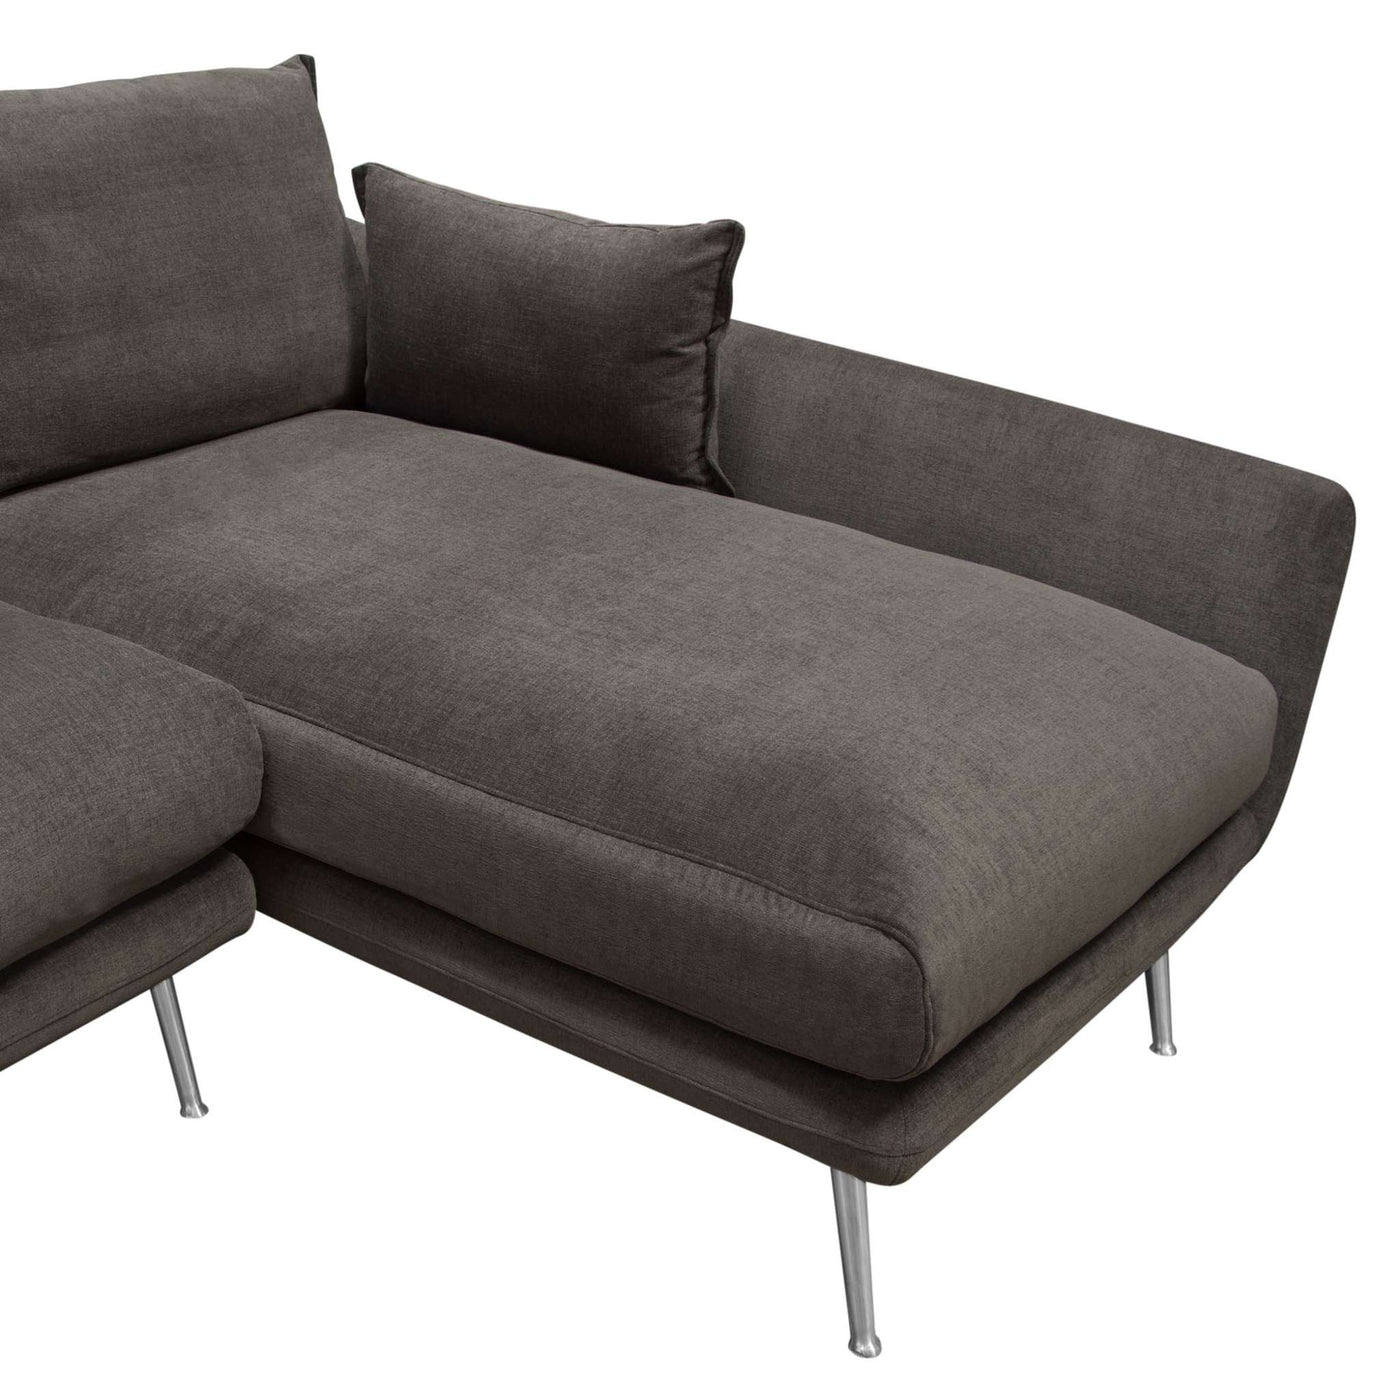 Vantage RF 2PC Sectional in Fabric w/ Brushed Metal Legs by Diamond Sofa